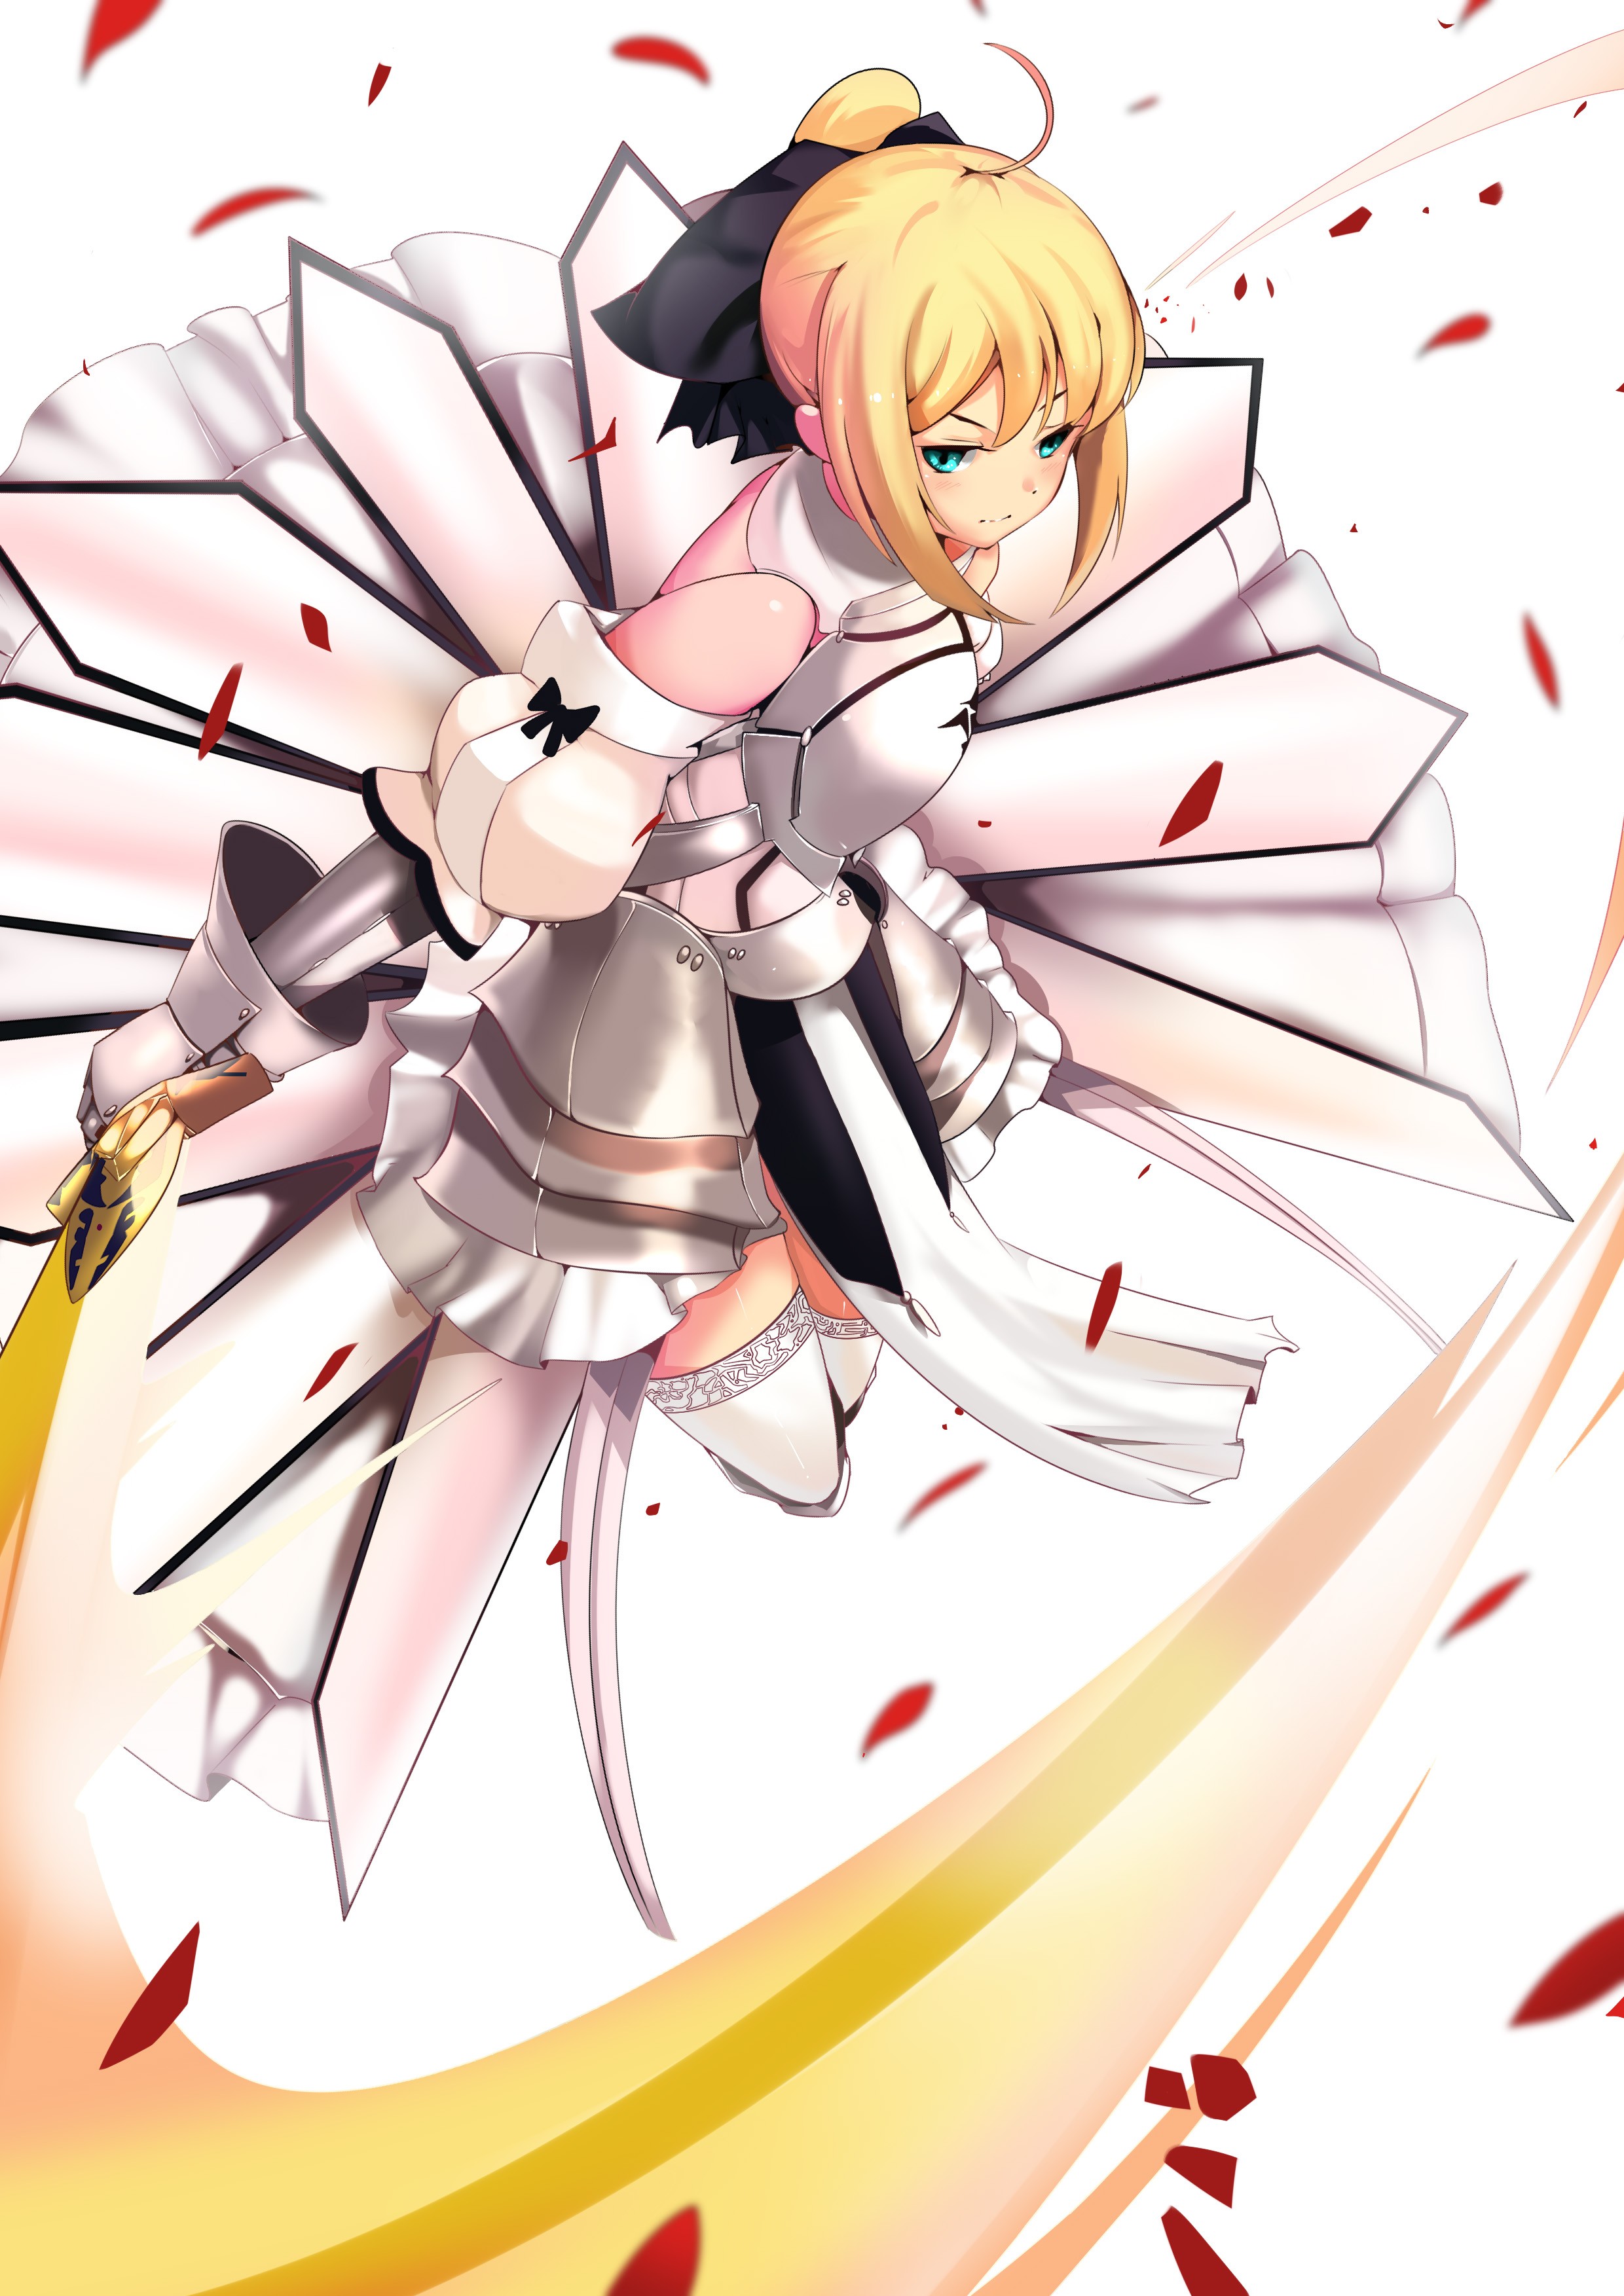 Anime 2480x3507 anime anime girls Fate/Stay Night Fate/Unlimited Codes  Saber Saber Lily armor dress sword weapon fantasy art fantasy girl